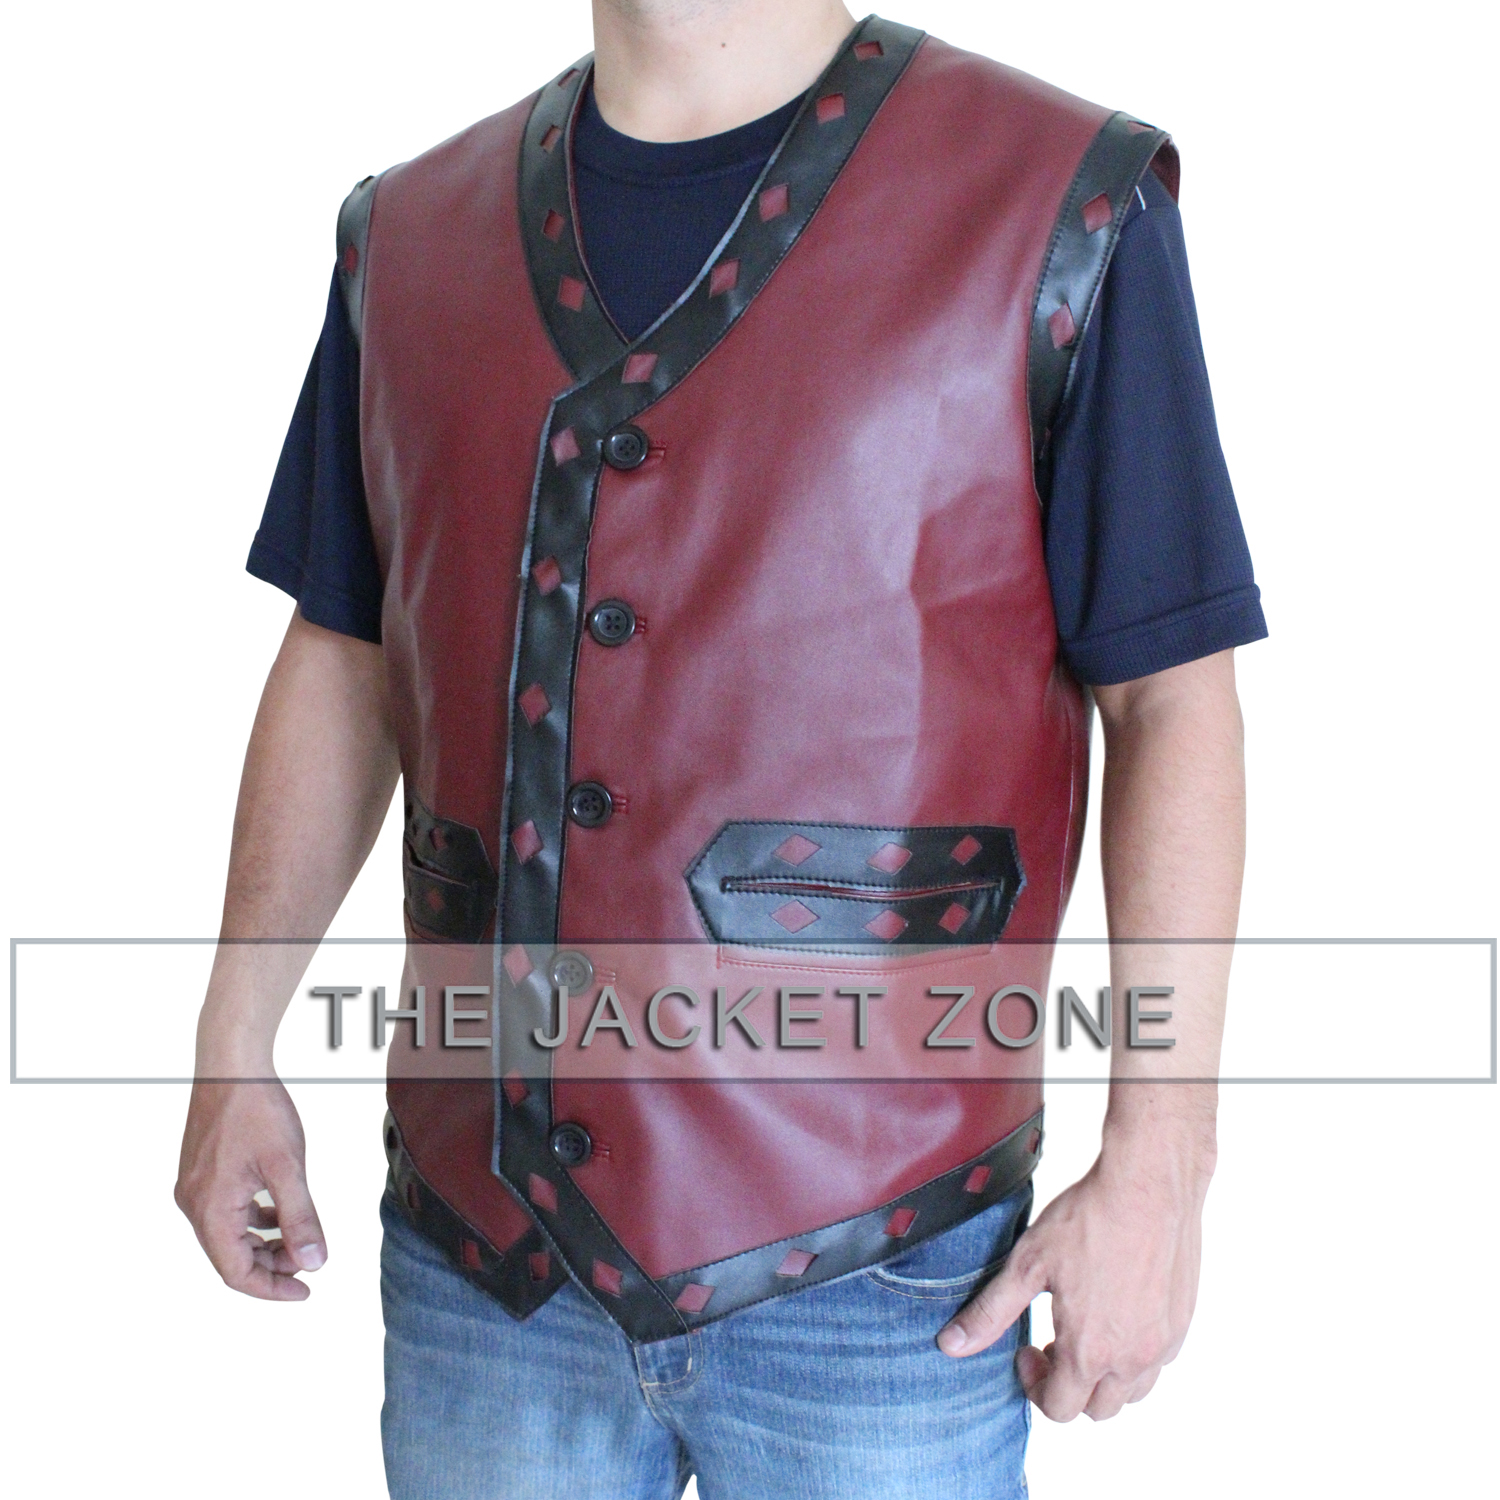 The Warriors Movie Vest Red Wool Bomber Jacket With The Warriors Patches